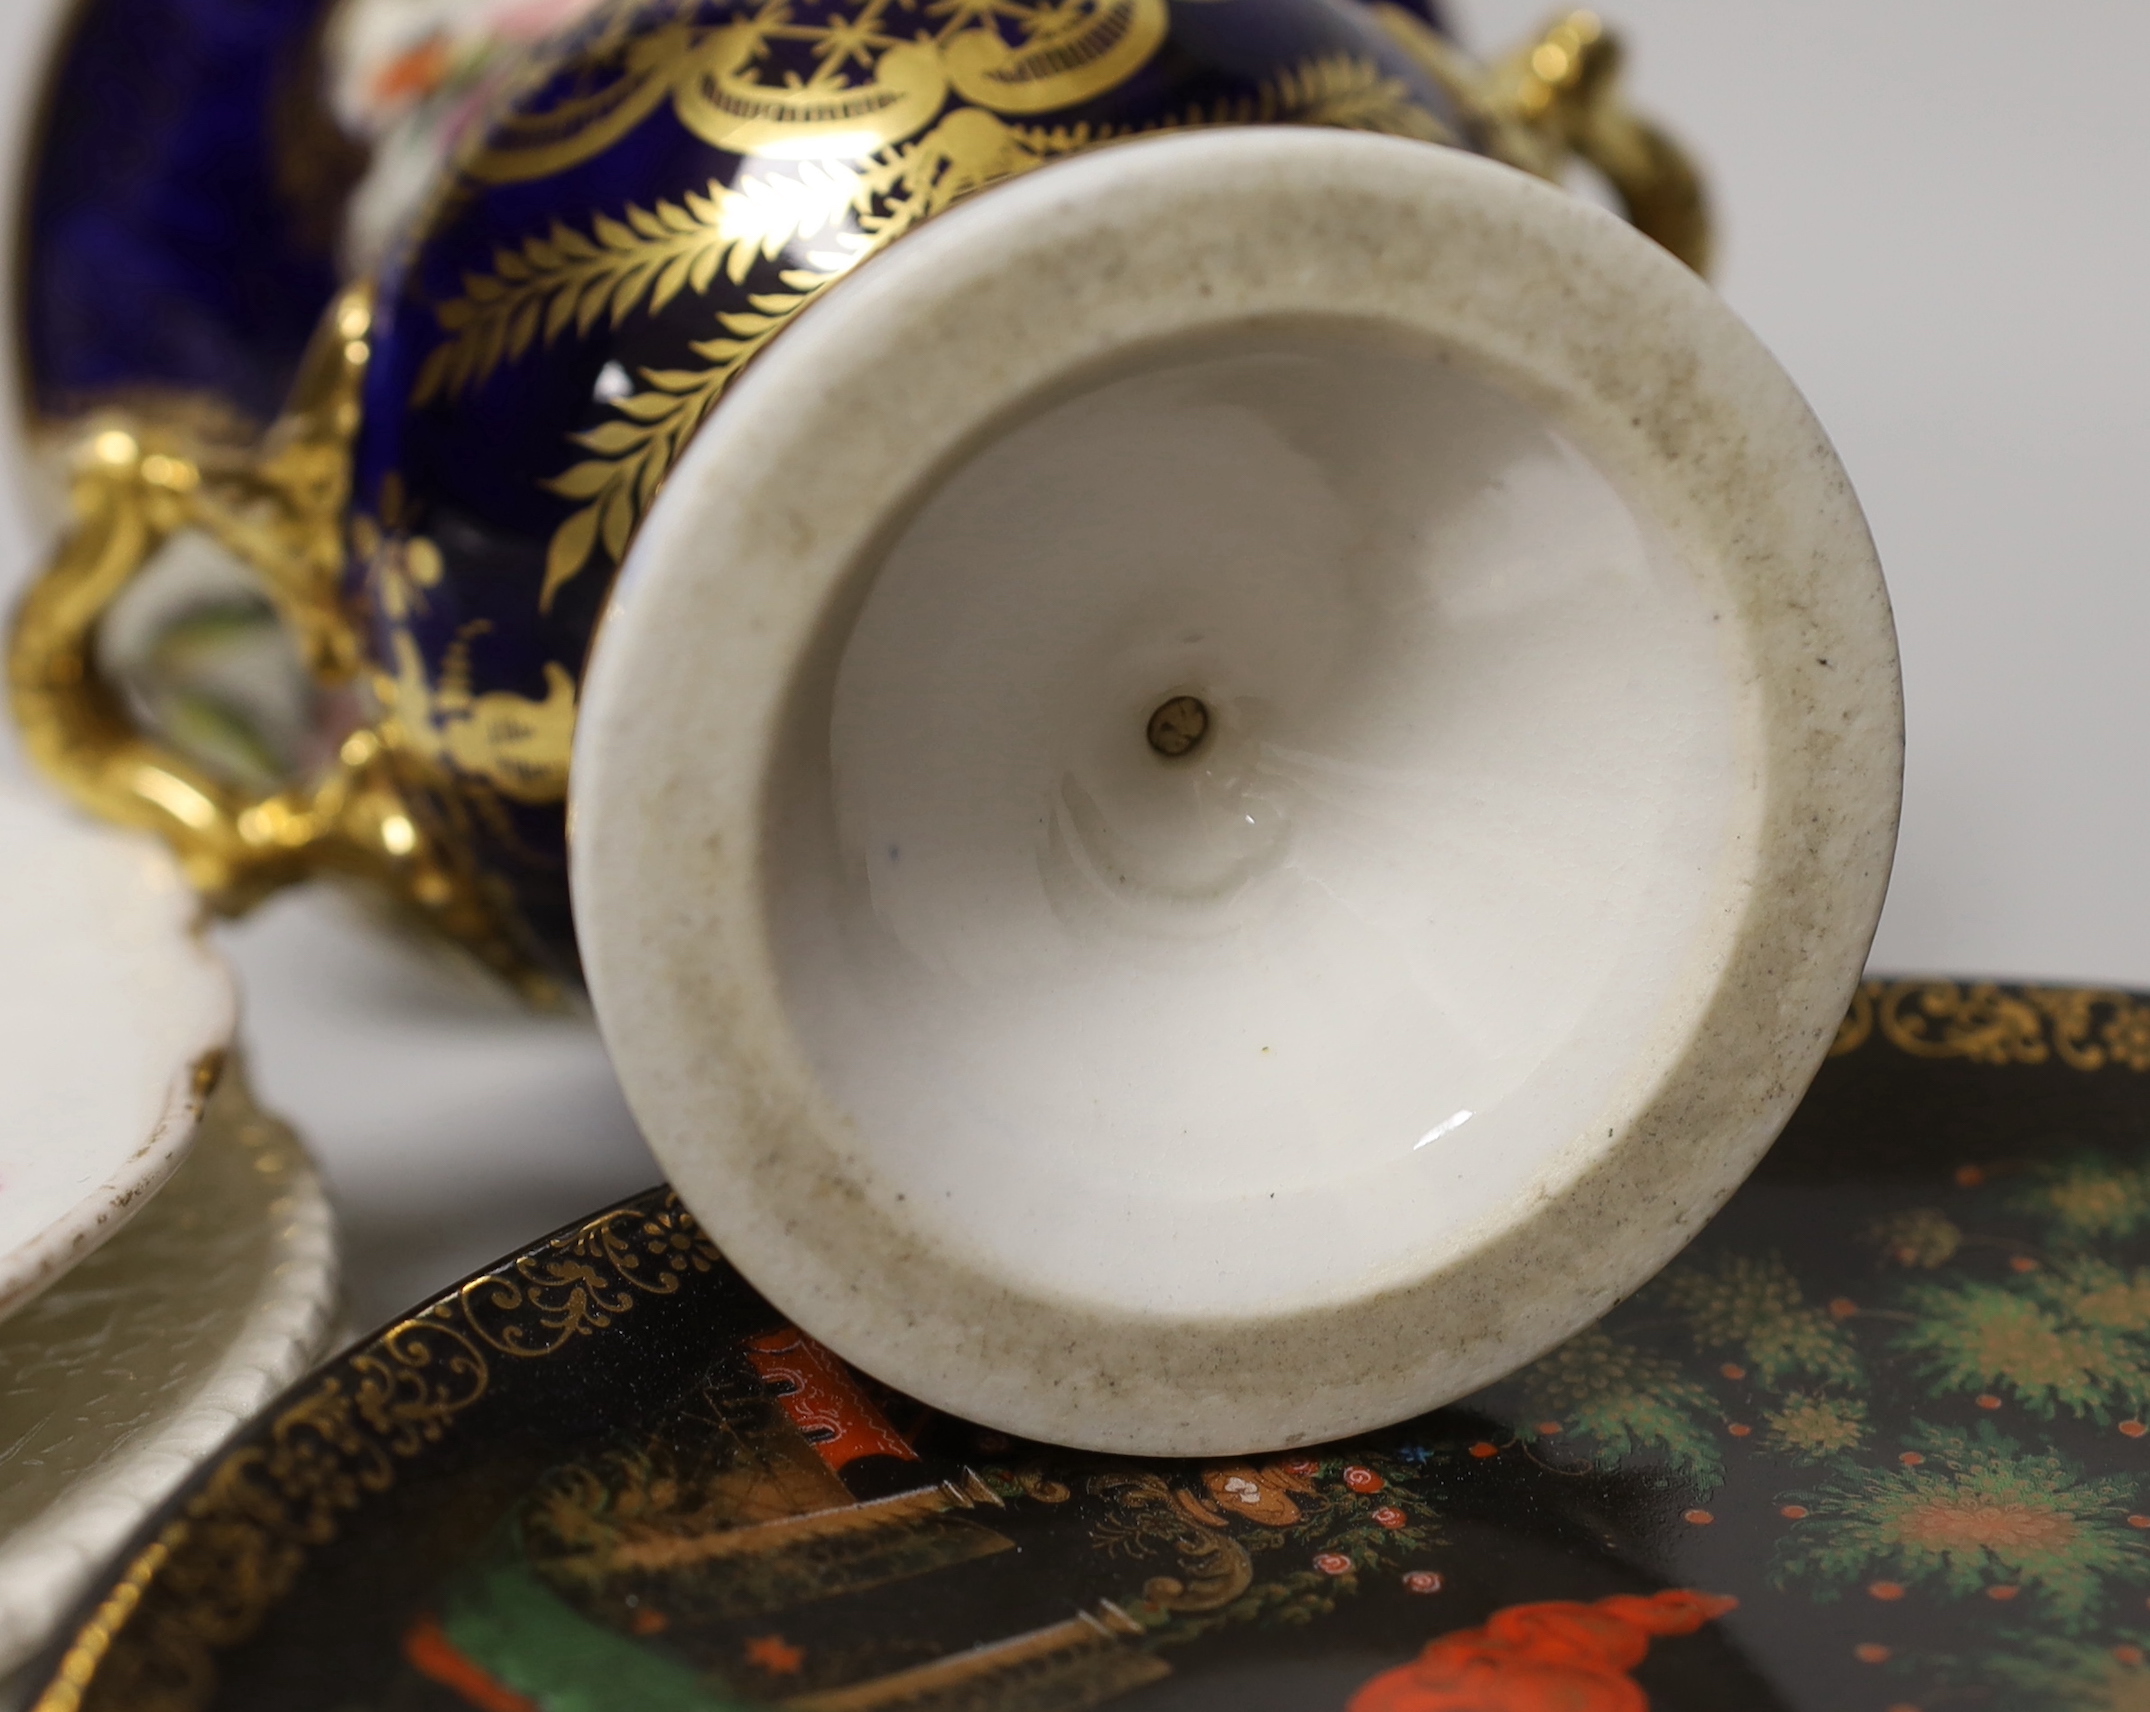 19th century and later Continental china including a Dresden cup and saucer and chocolate cup, a Crown Derby plate etc, tallest 17cm high